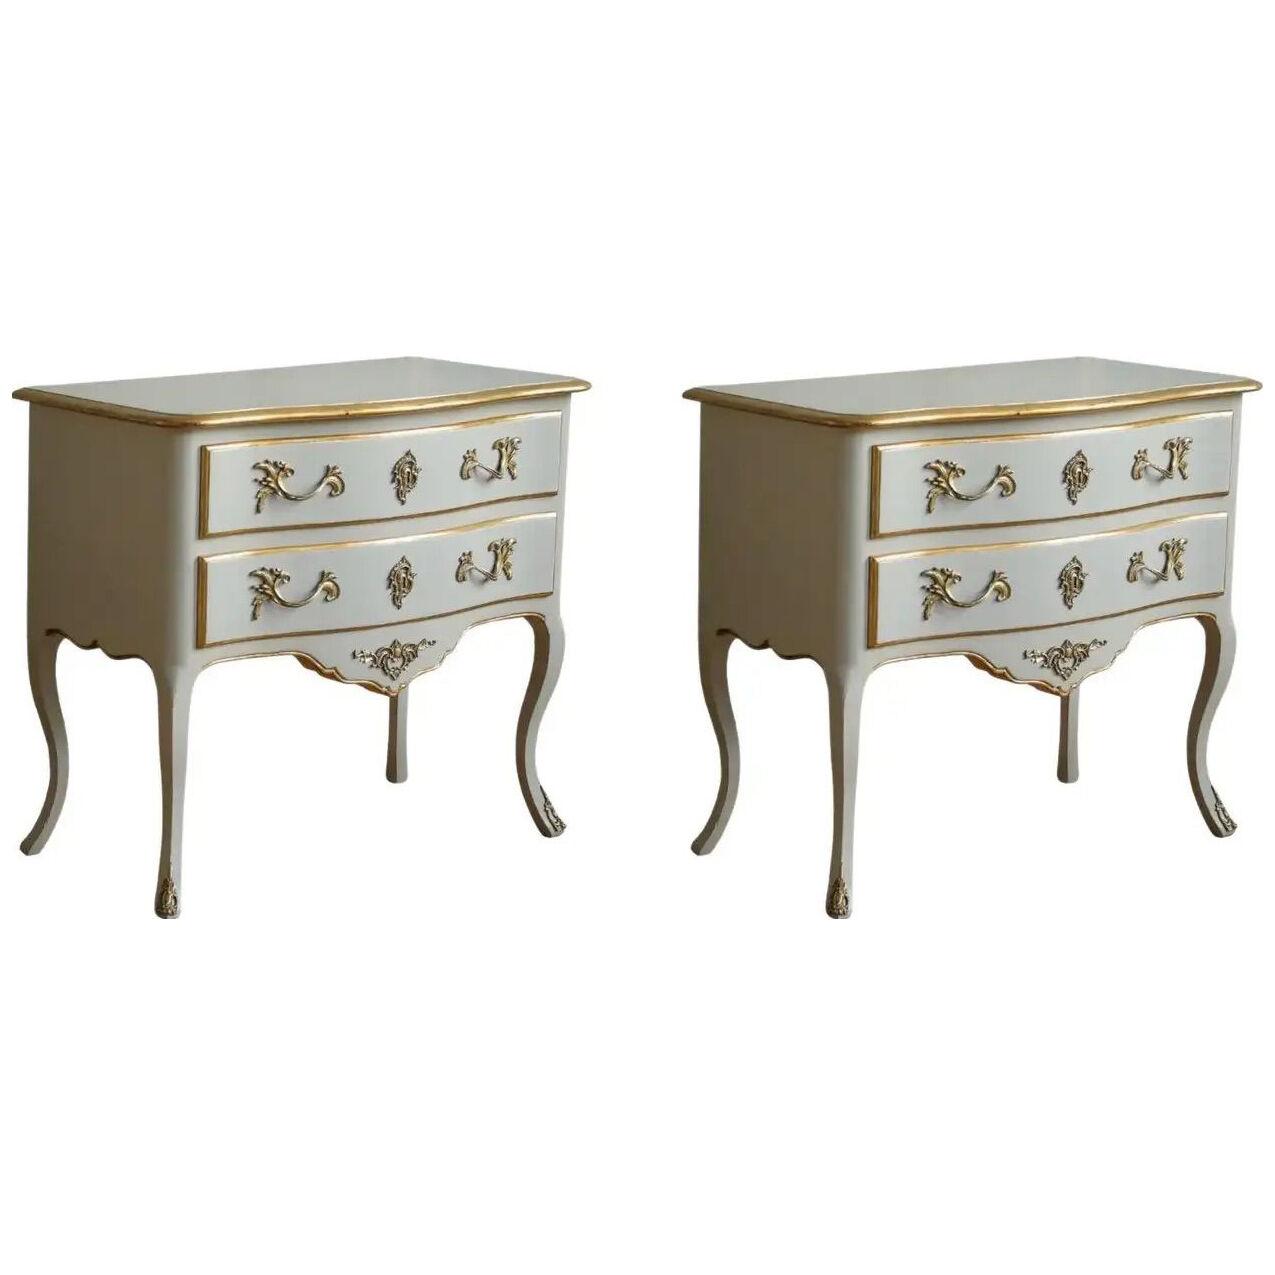 Pair of Gilt Wood & Painted Louis XV Style Bedside Tables/Chest of Drawers